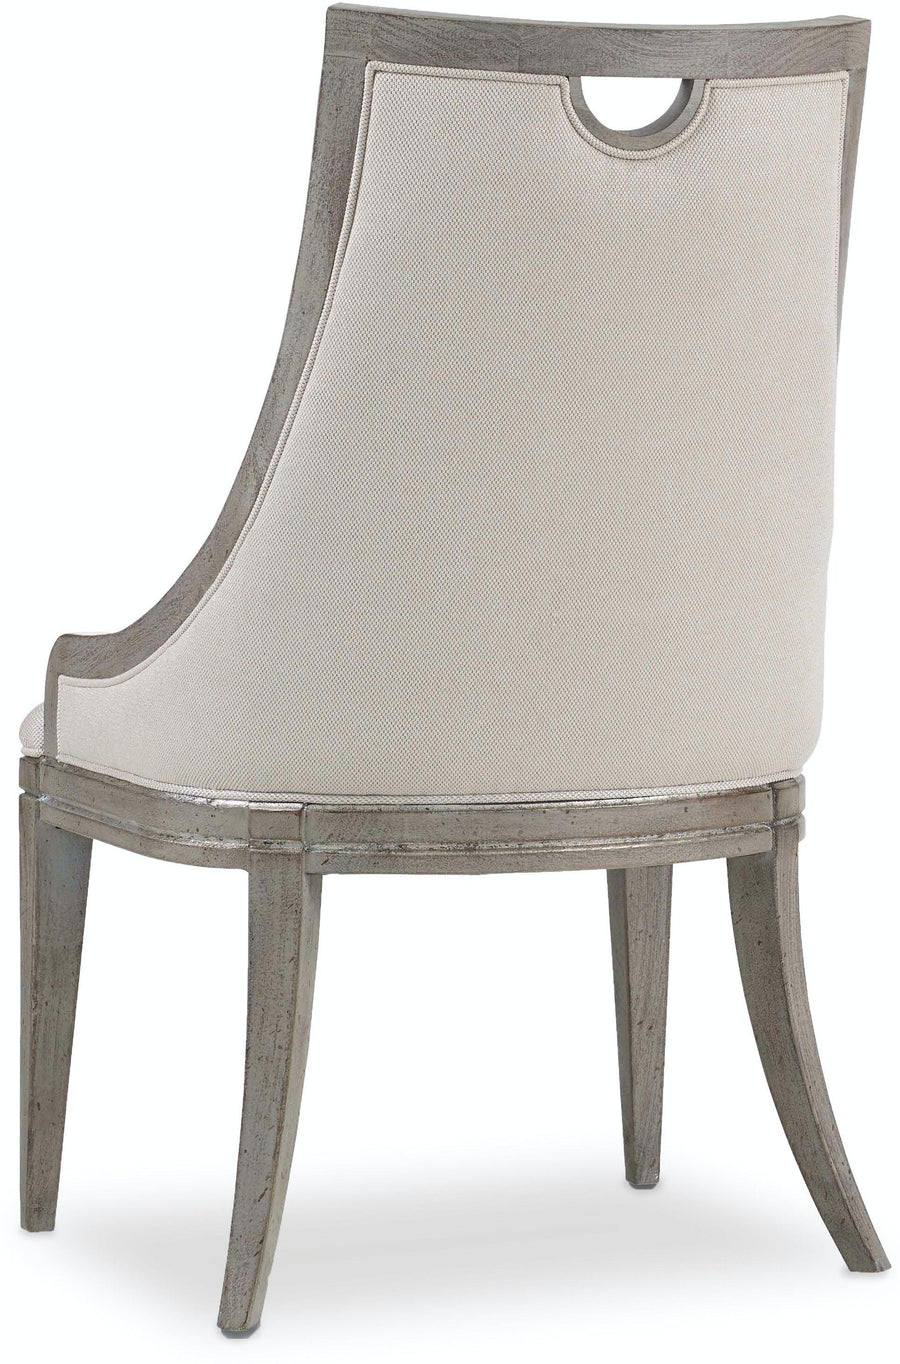 Dining Room Sanctuary Upholstered Side Chair - 2 per carton/price ea - Maison Vogue